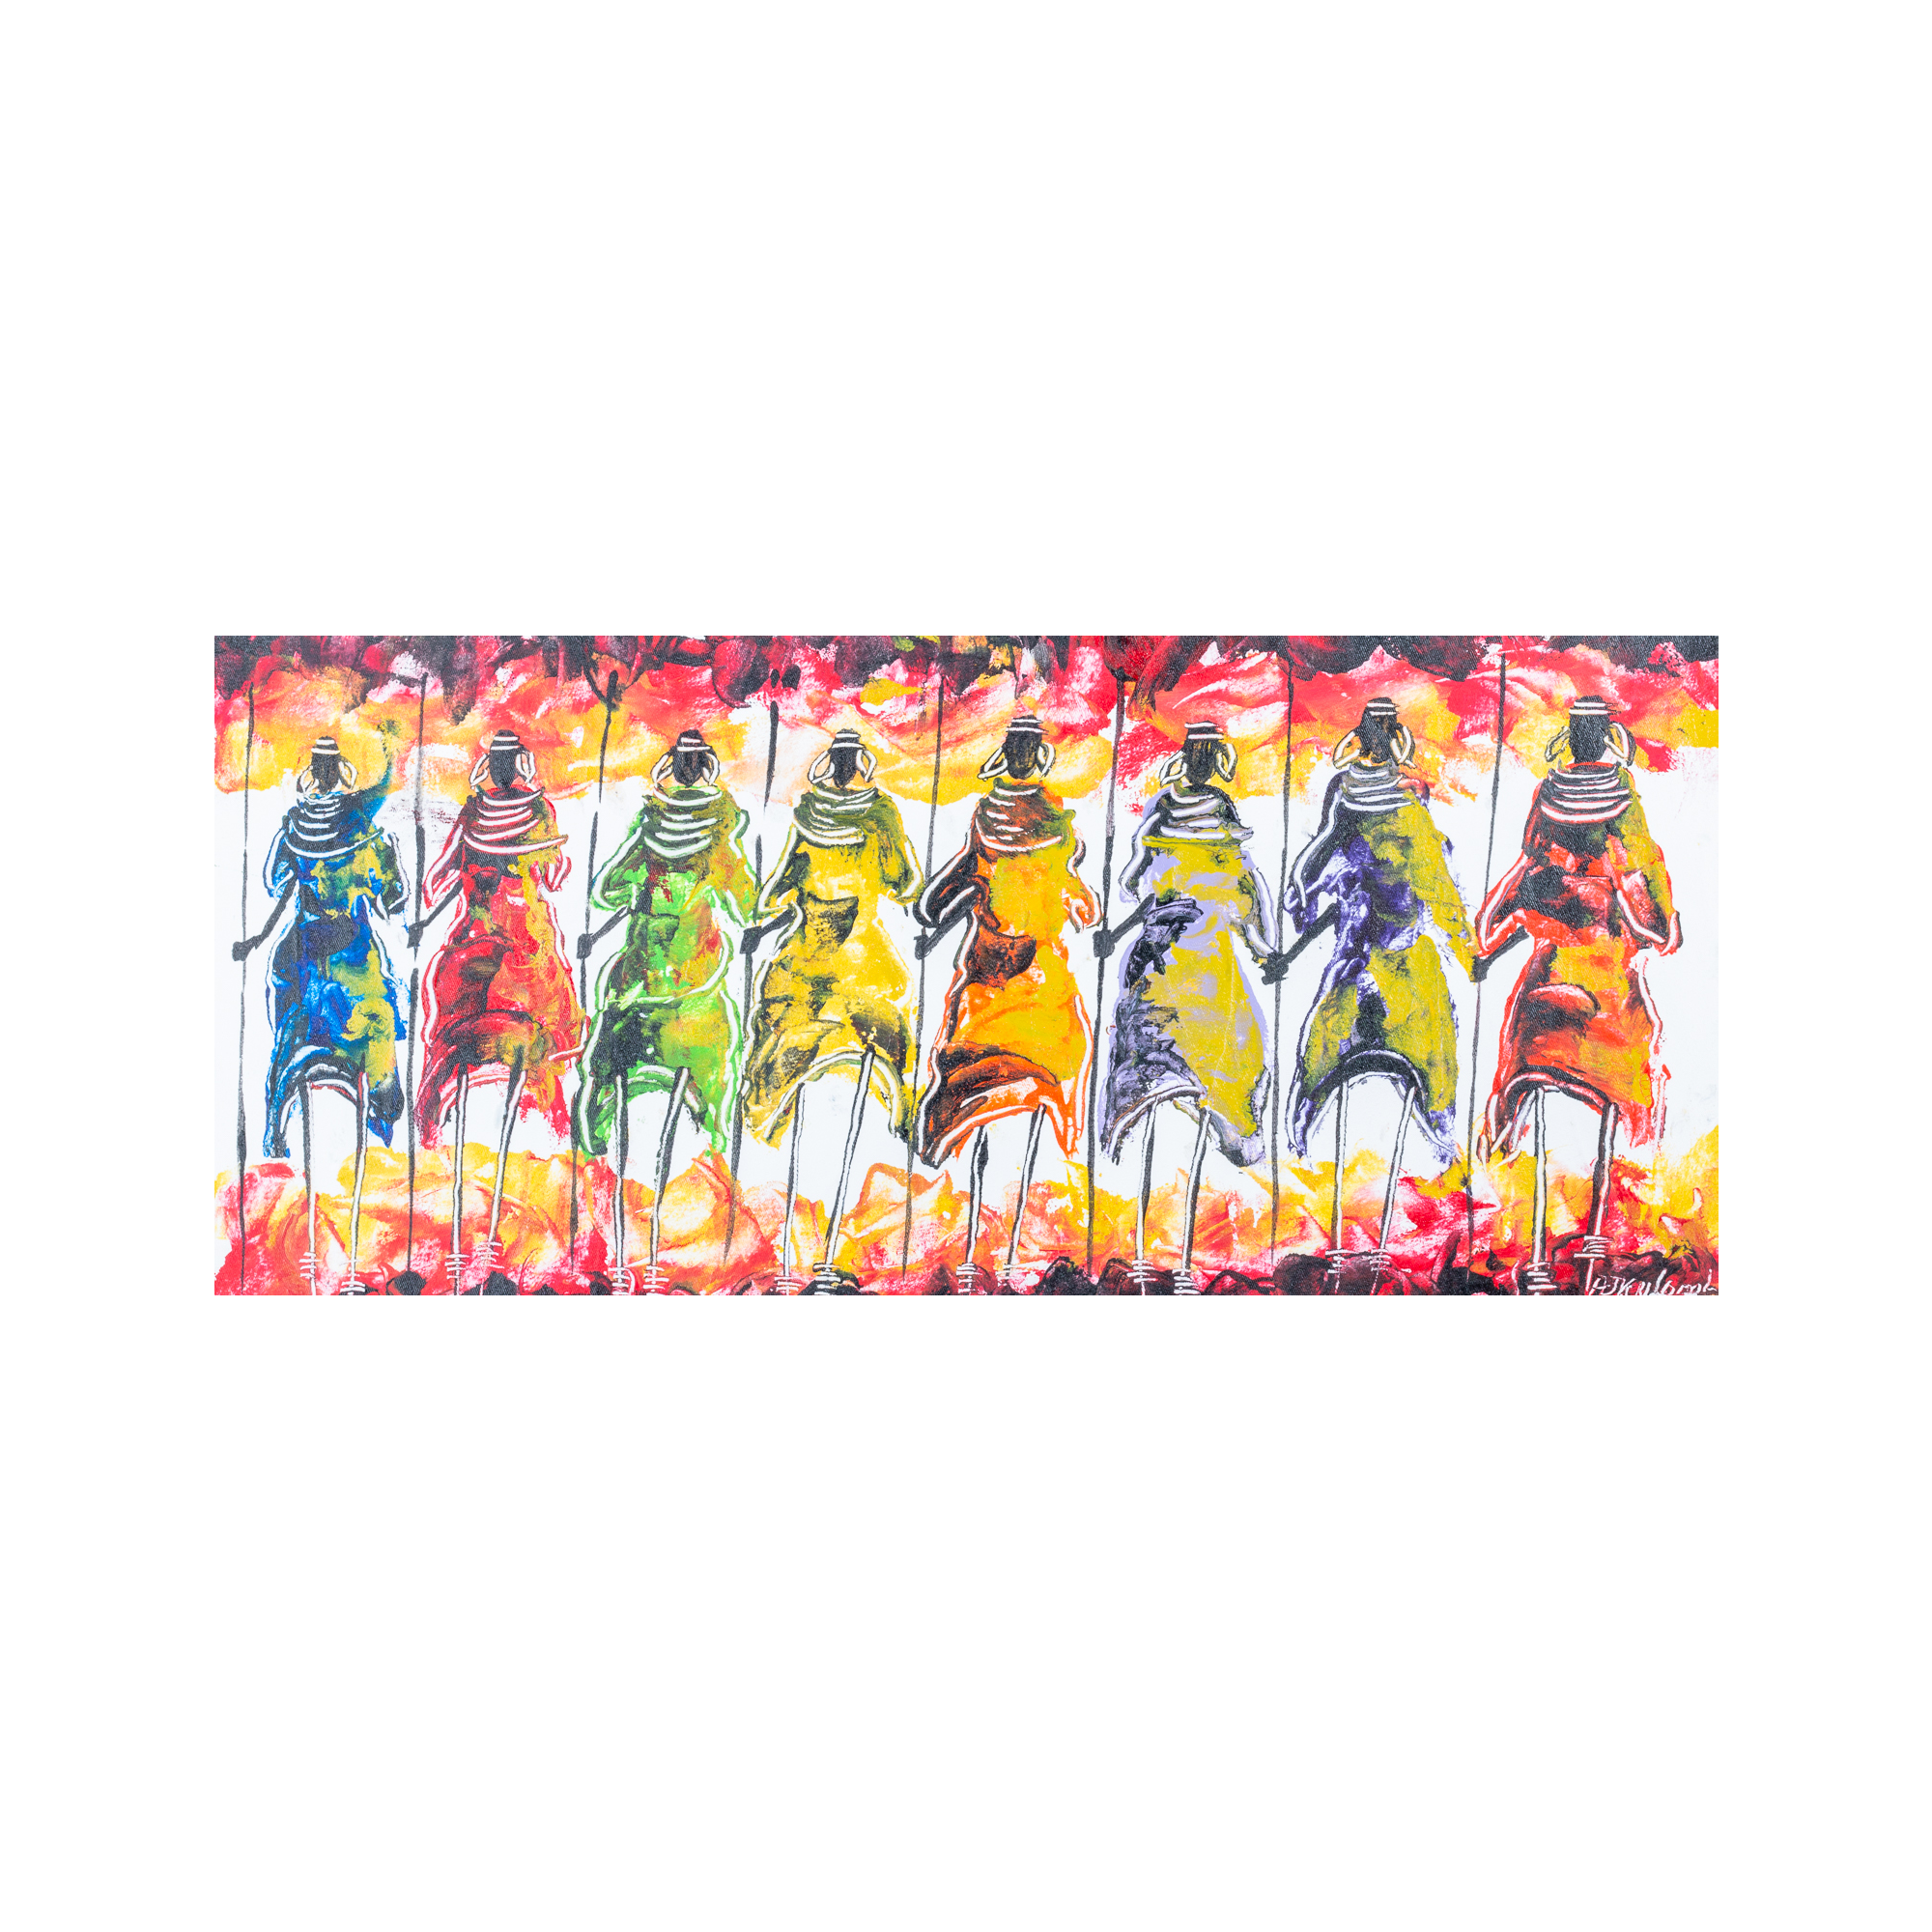 Large Tribal Unity in Colour Canvas Painting - By Banda